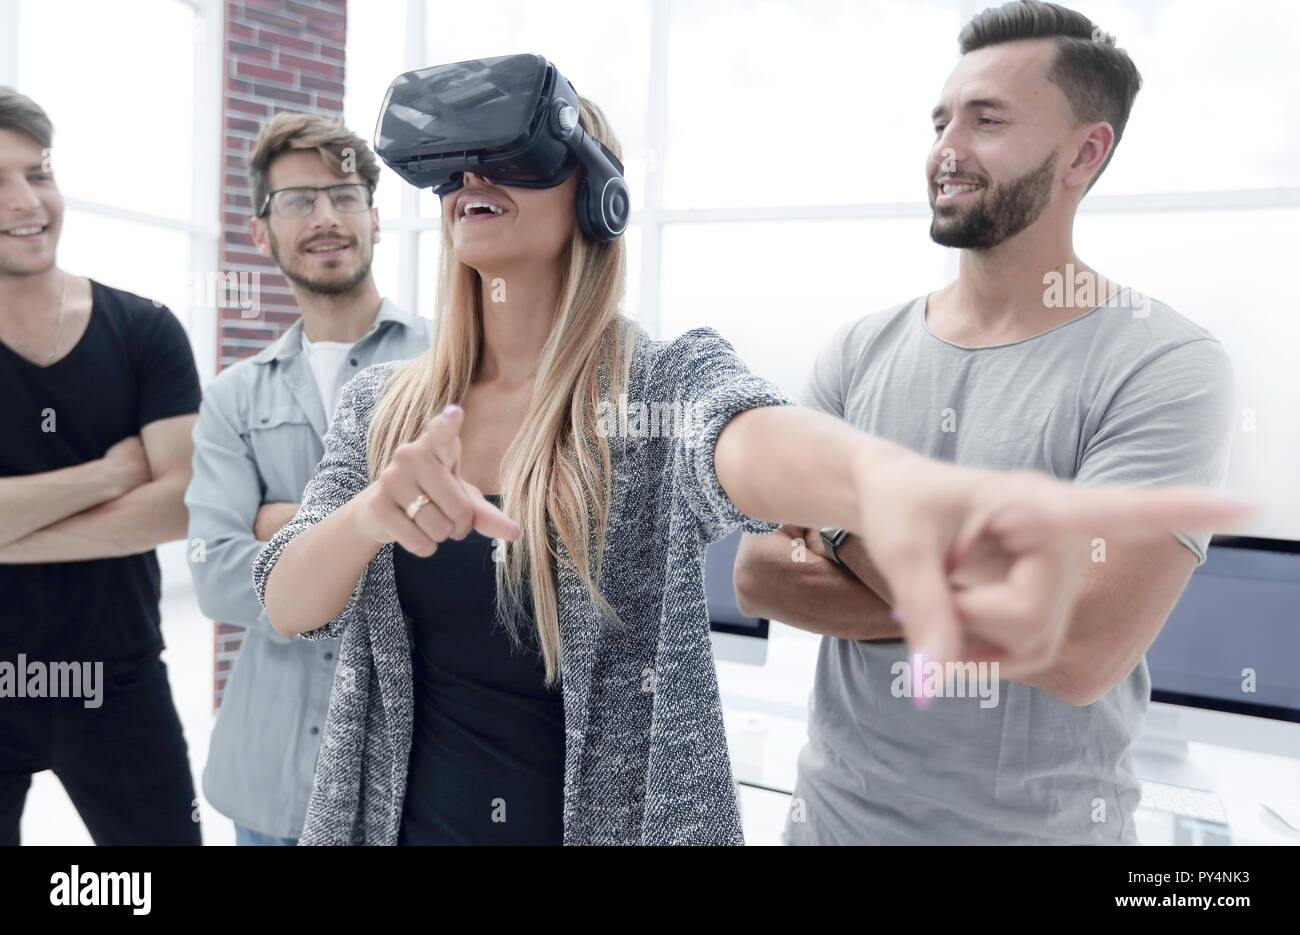 woman standing in the office with VR glasses Stock Photo